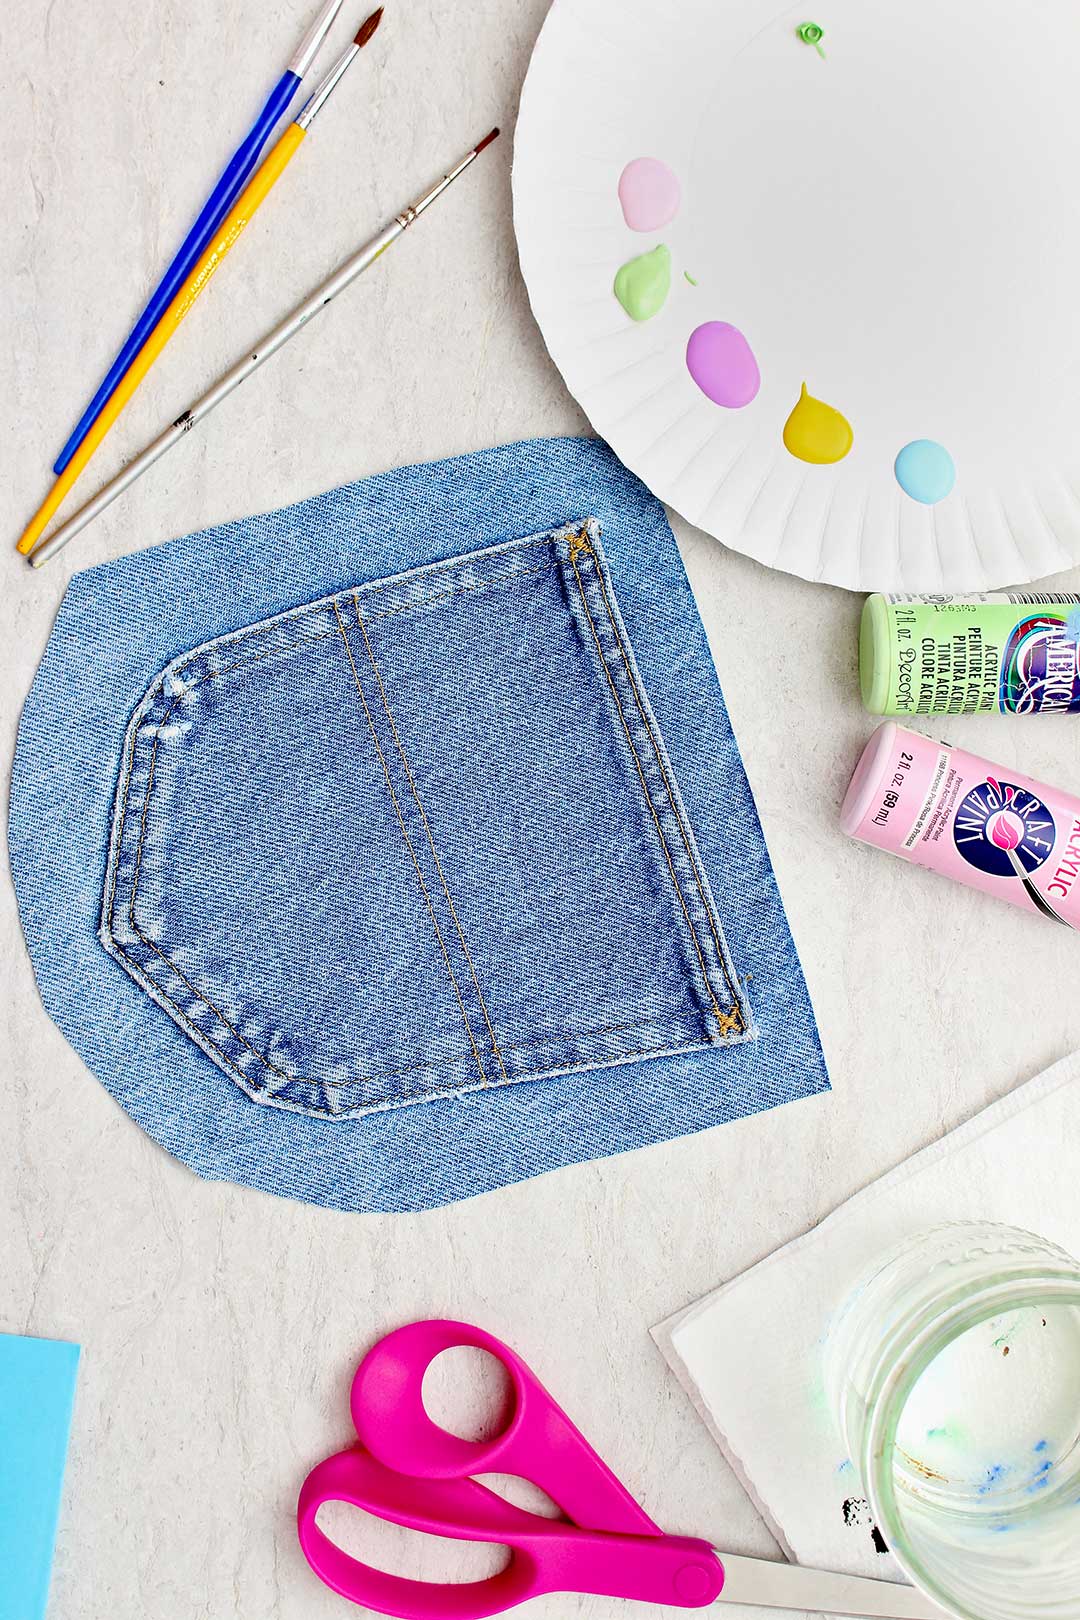 Cut out jeans pocket, a paper plate of acrylic paint swatches and other supplies.